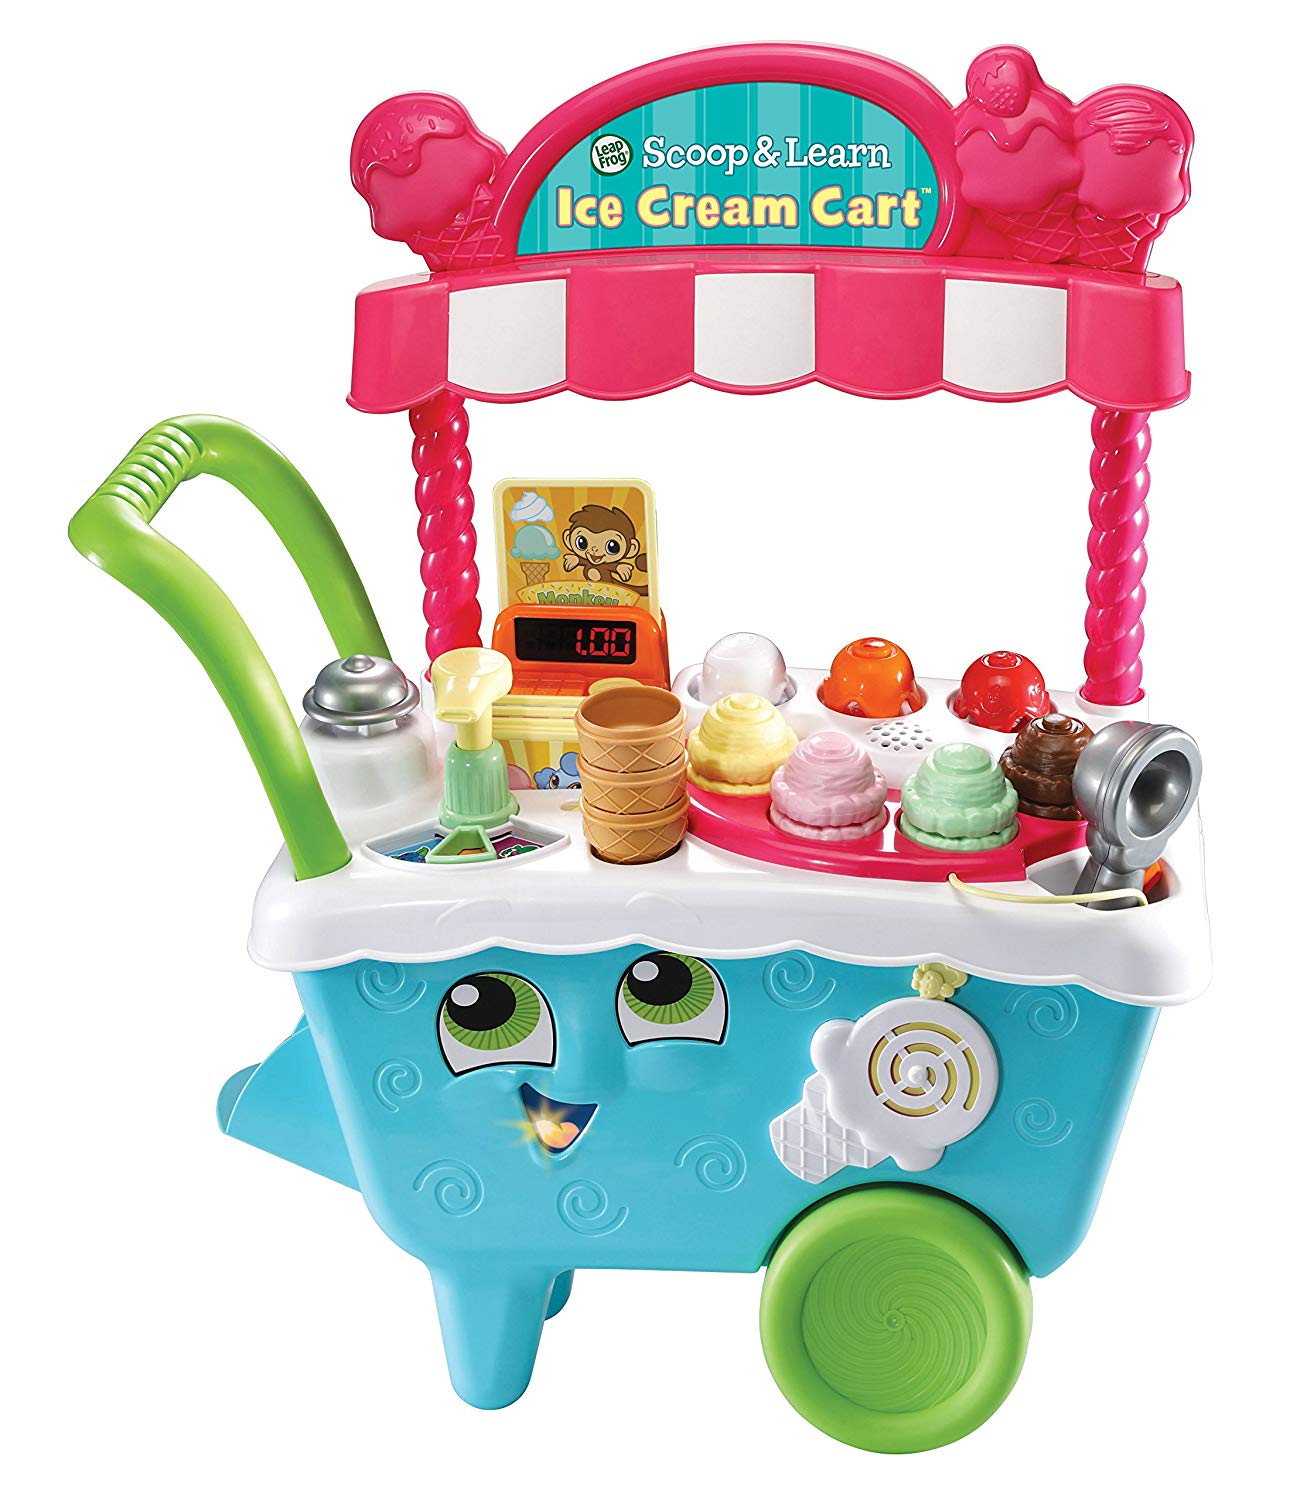 Leapfrog Scoop and Learn Ice Cream Cart – Complete Accesories